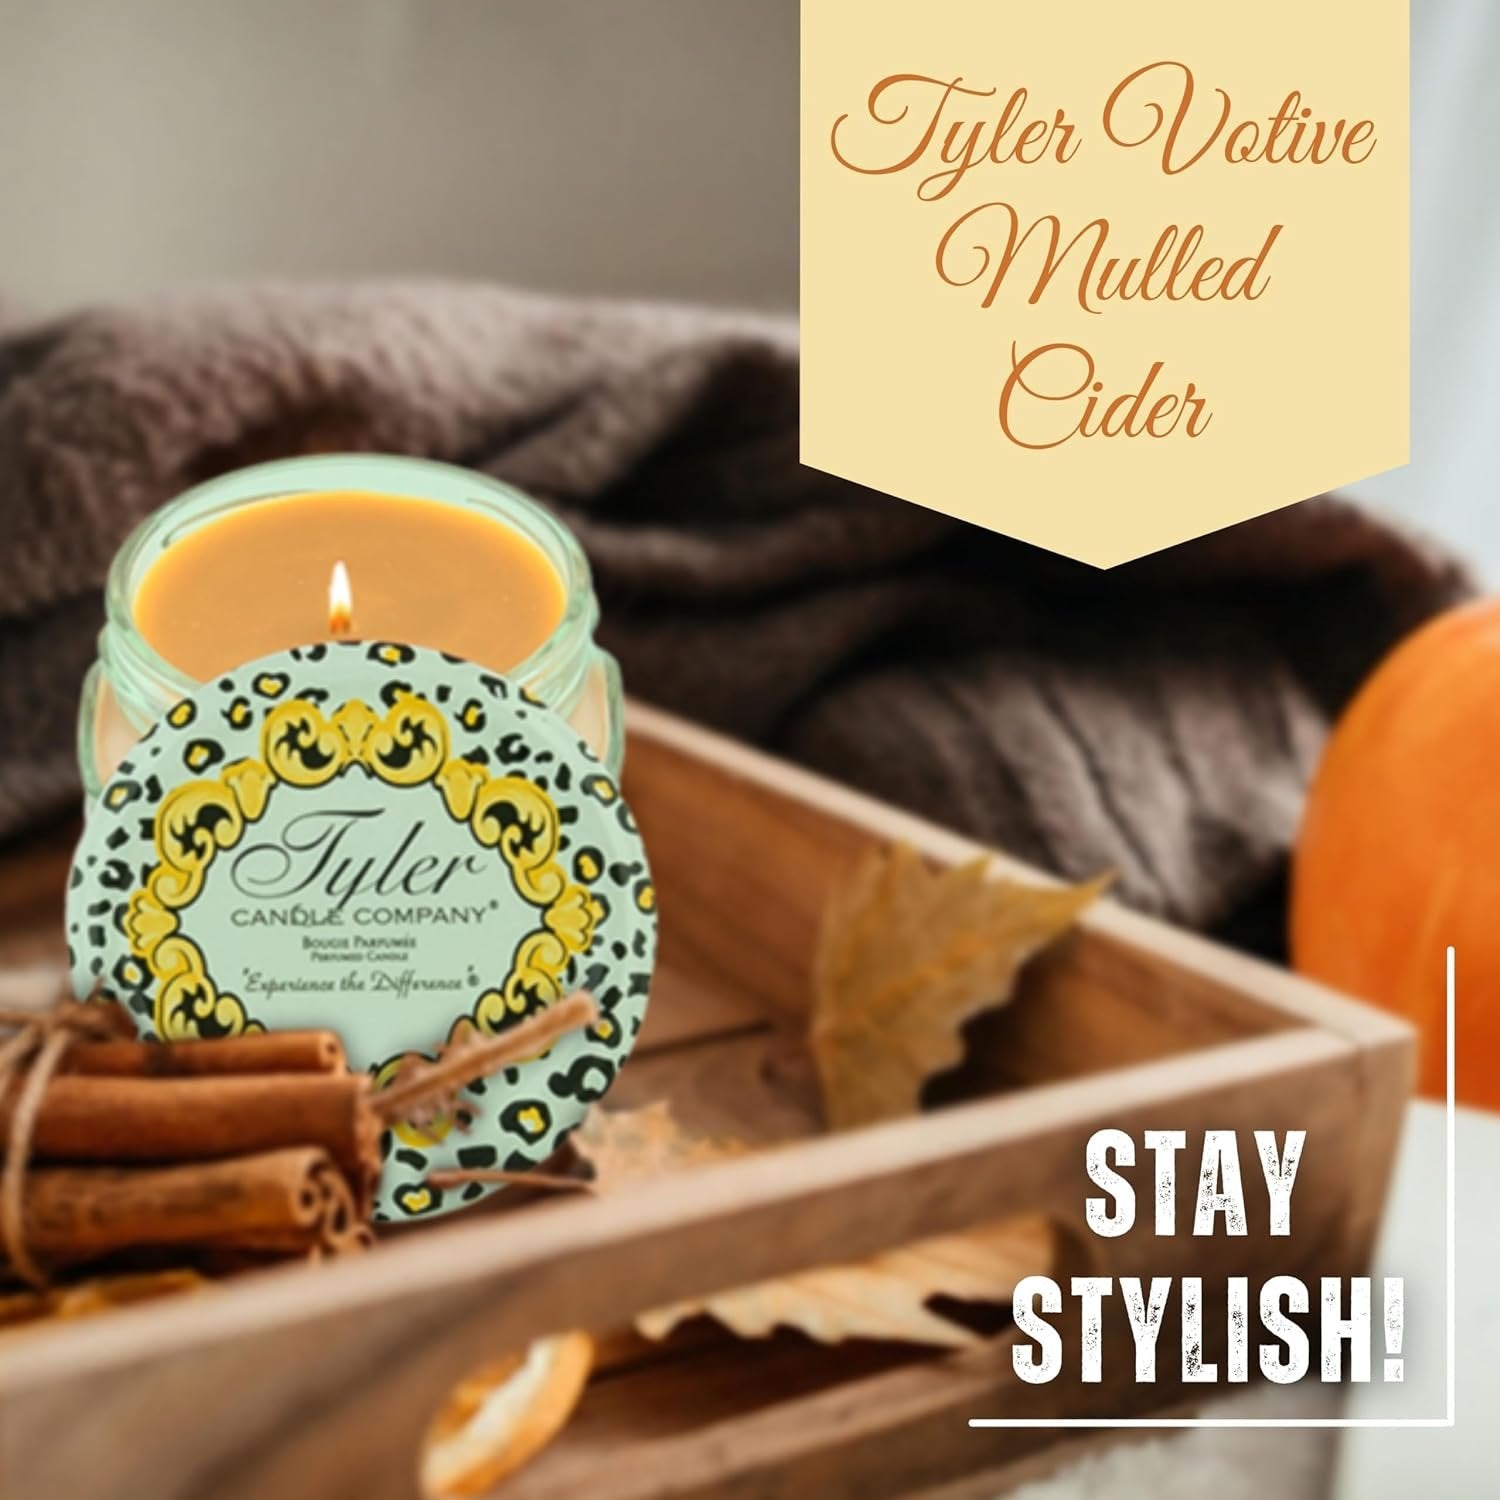 Worldwide Nutrition Bundle, 2 Items: Tyler Candle Company Mulled Cider Candles - Luxuriously Scented Fall Candles with Essential Oils - 3.4 oz Extra Large Candle & Multi-Purpose Key Chain